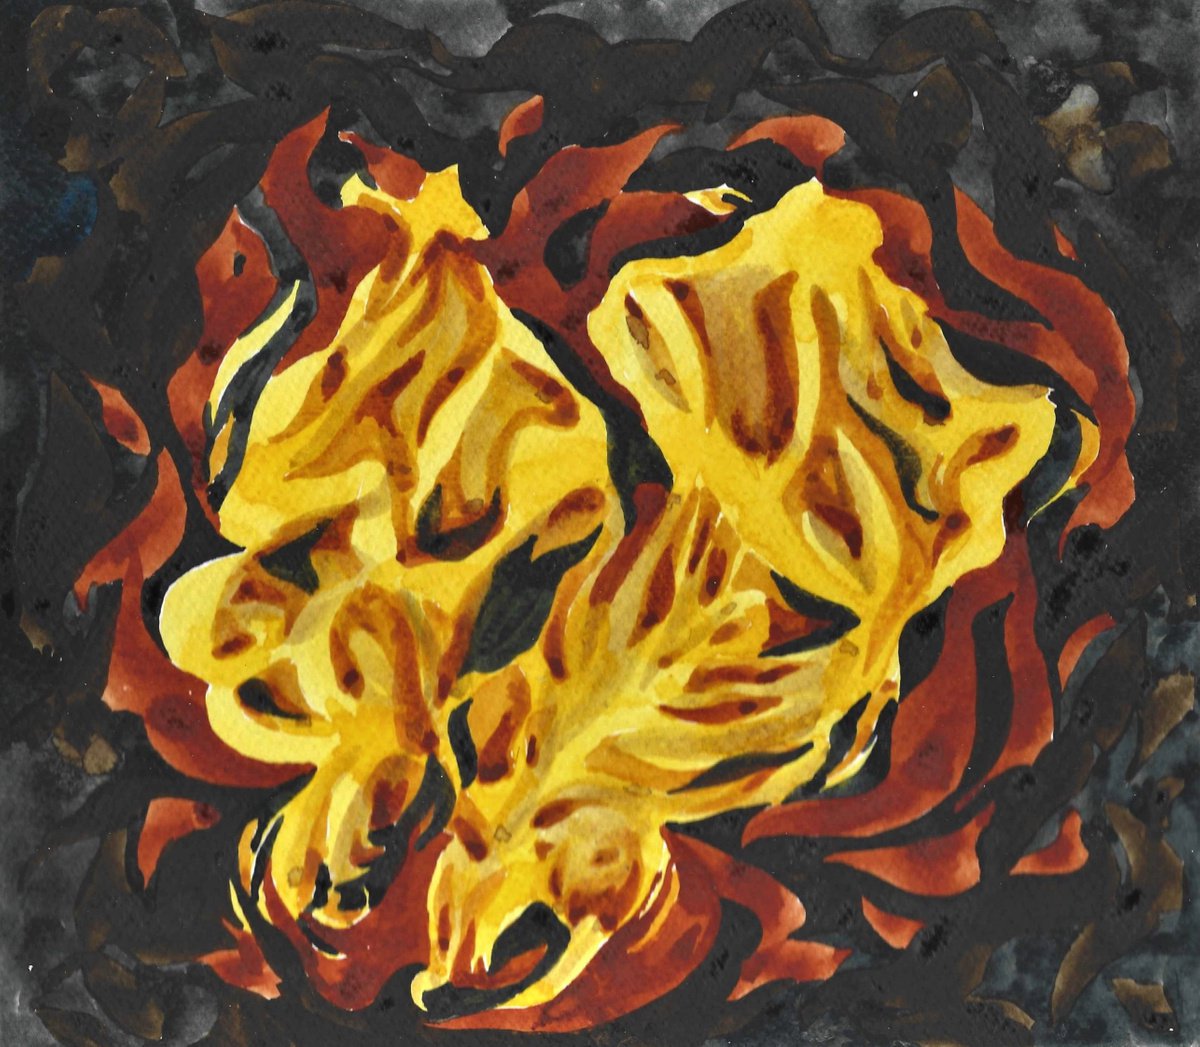 FLAMES II by Nives Palmic